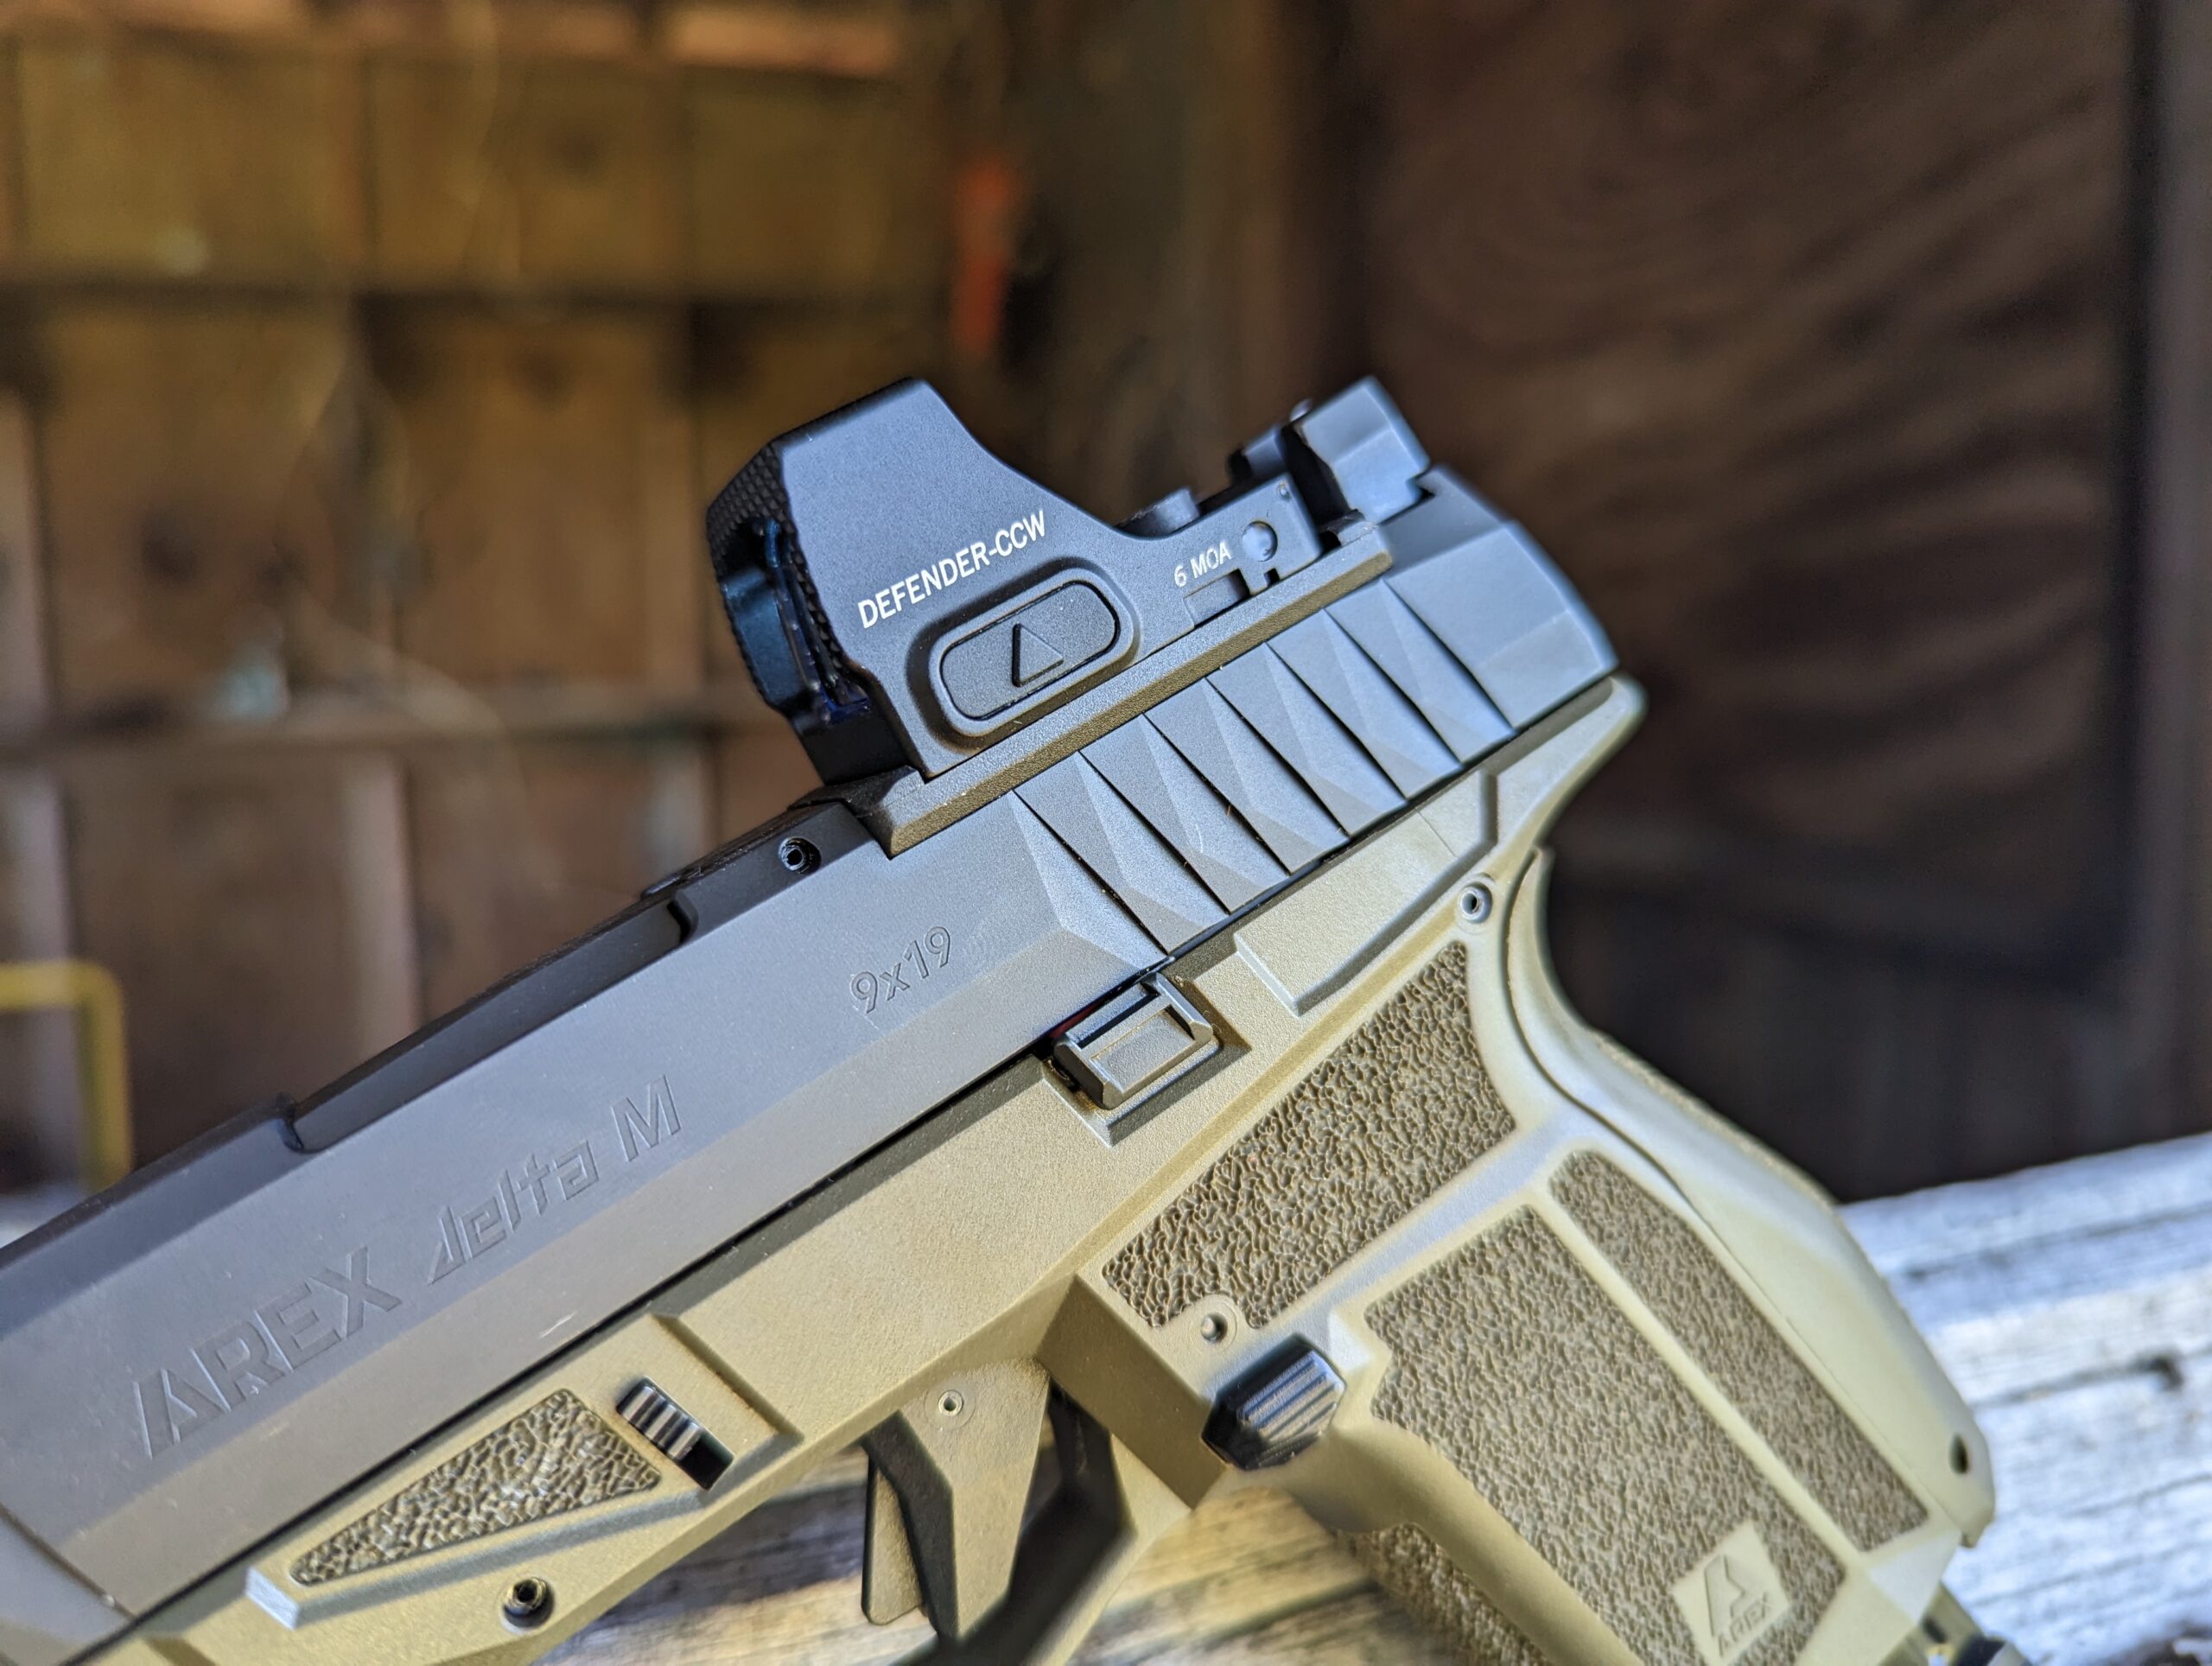 The Tactical Combat Gear Review Vortex Defender CCW Red Dot Sight